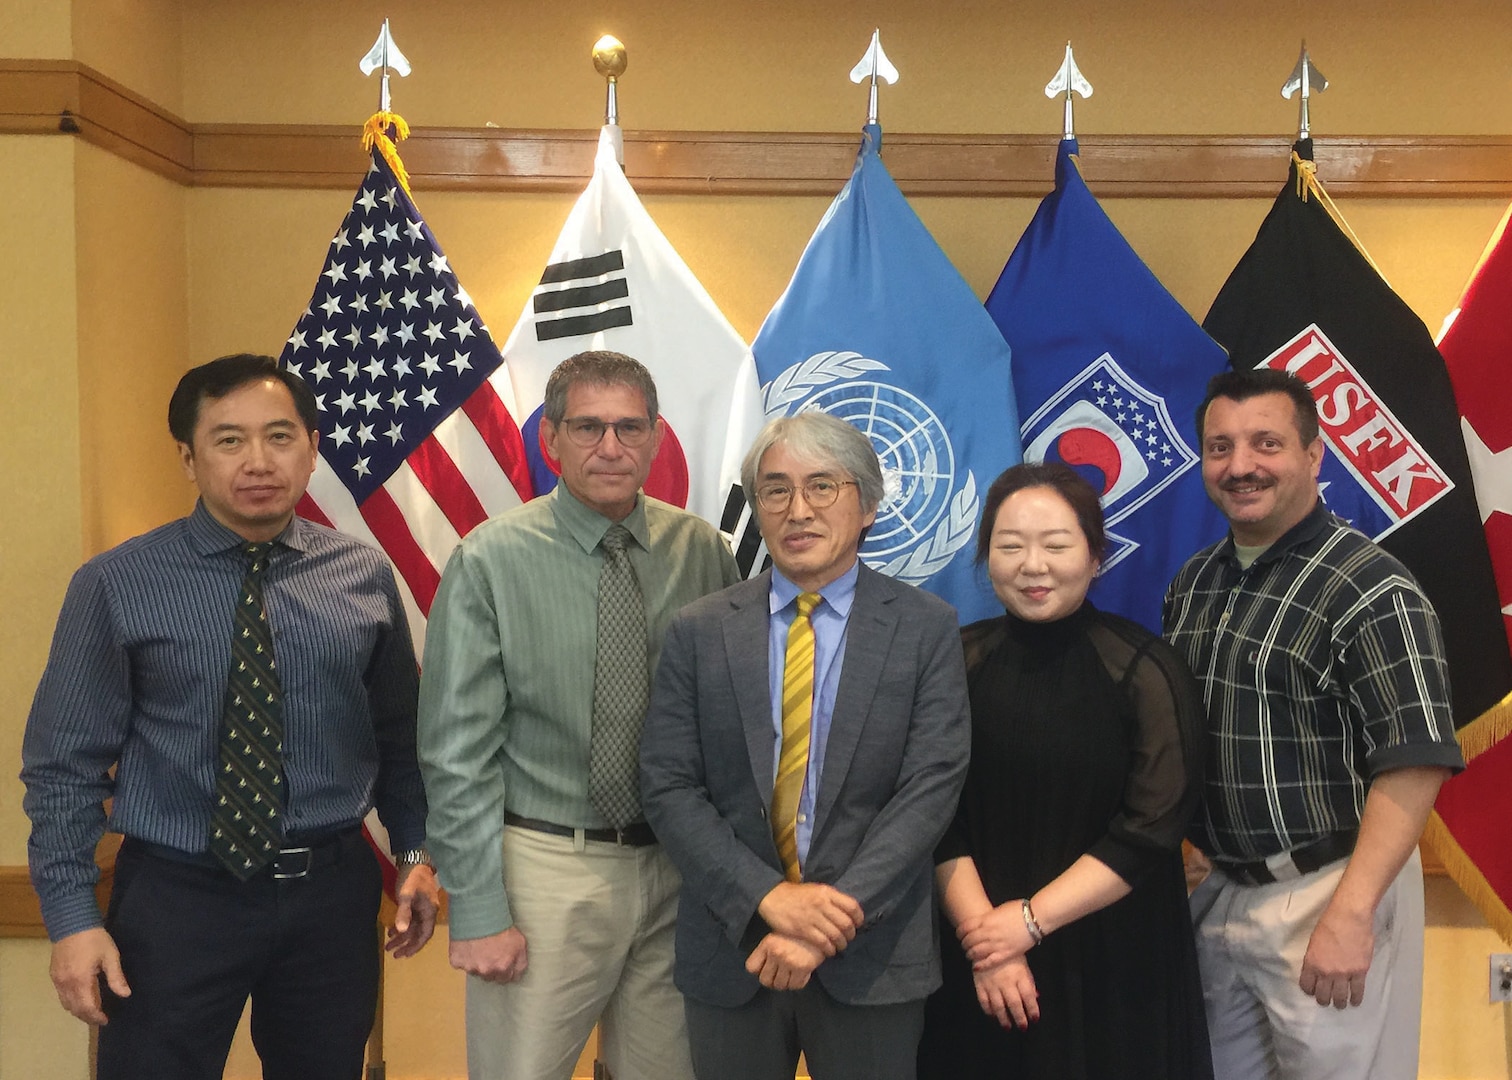 Kyu Sok Kwak (center) was recognized as the 2017 United States Forces Korea Civilian Employee of the Year